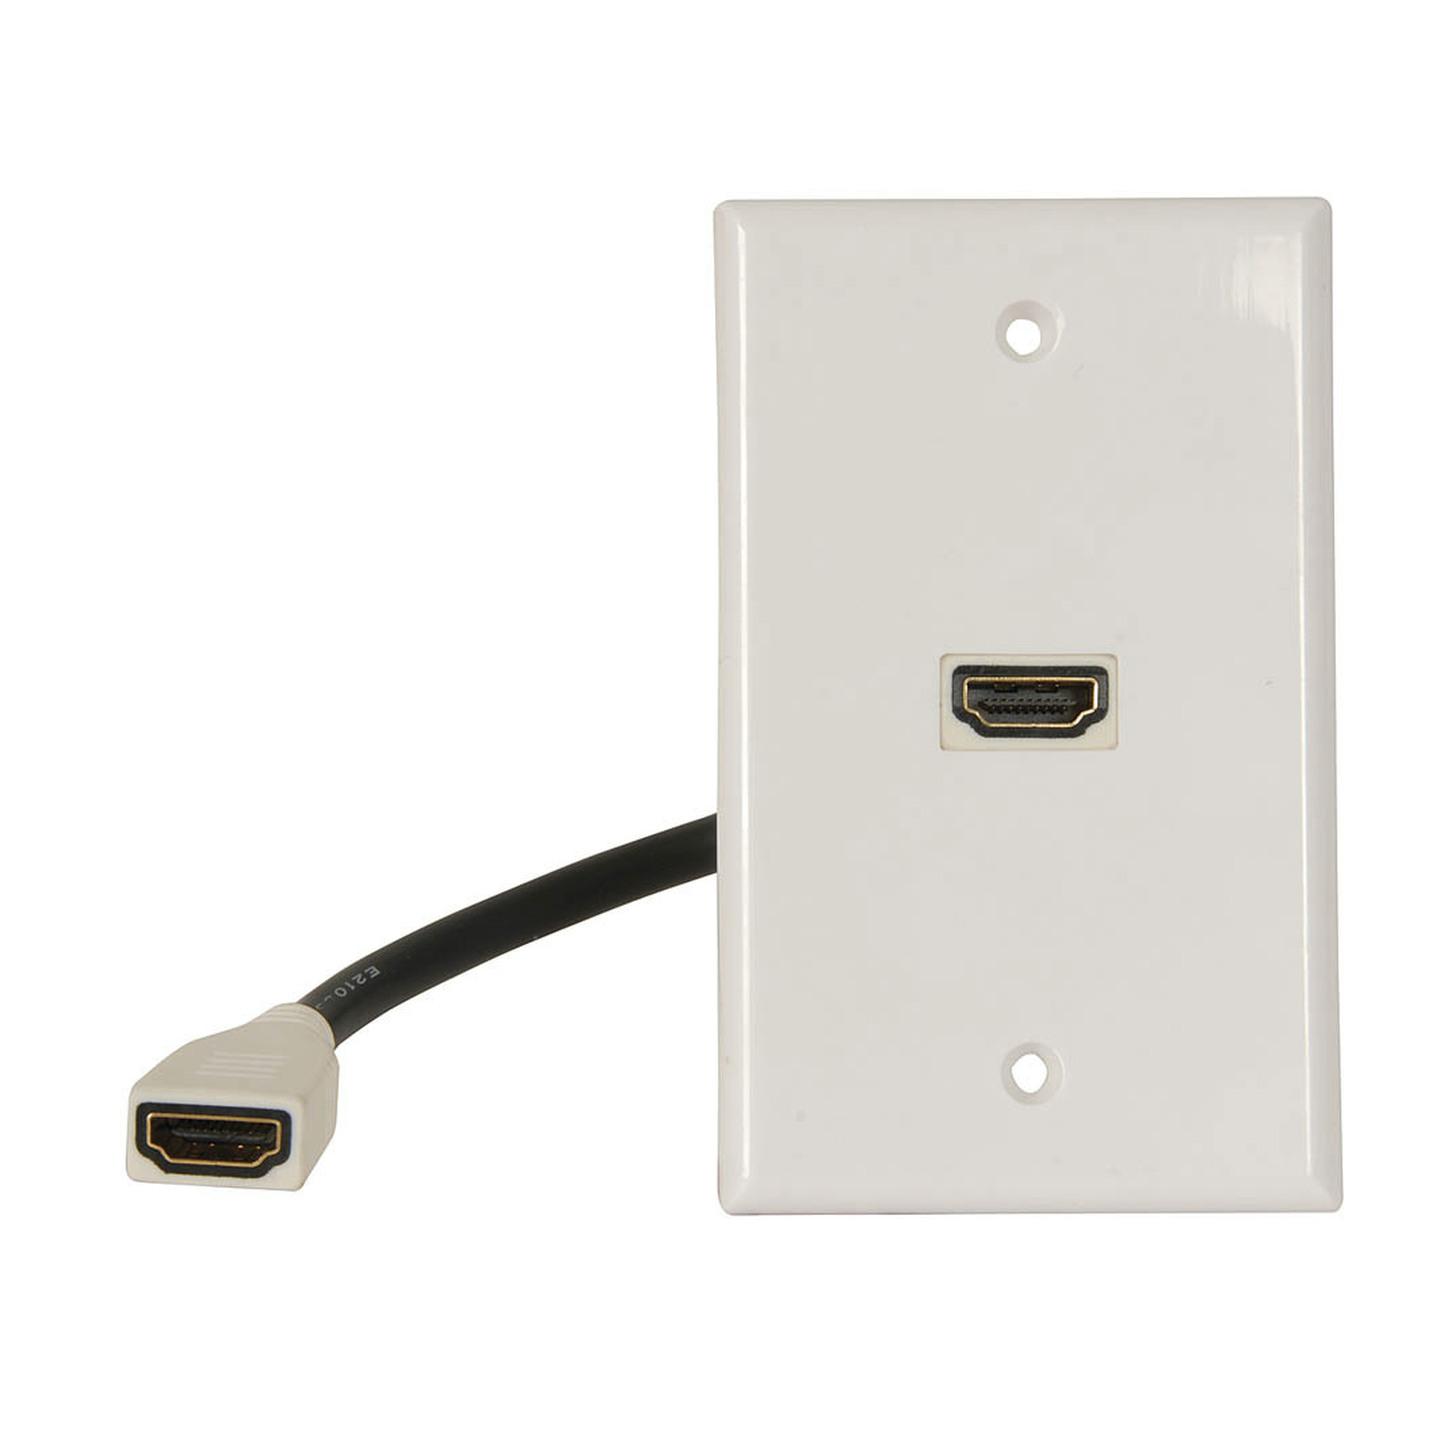 HDMI 2.0 wall plate with flylead